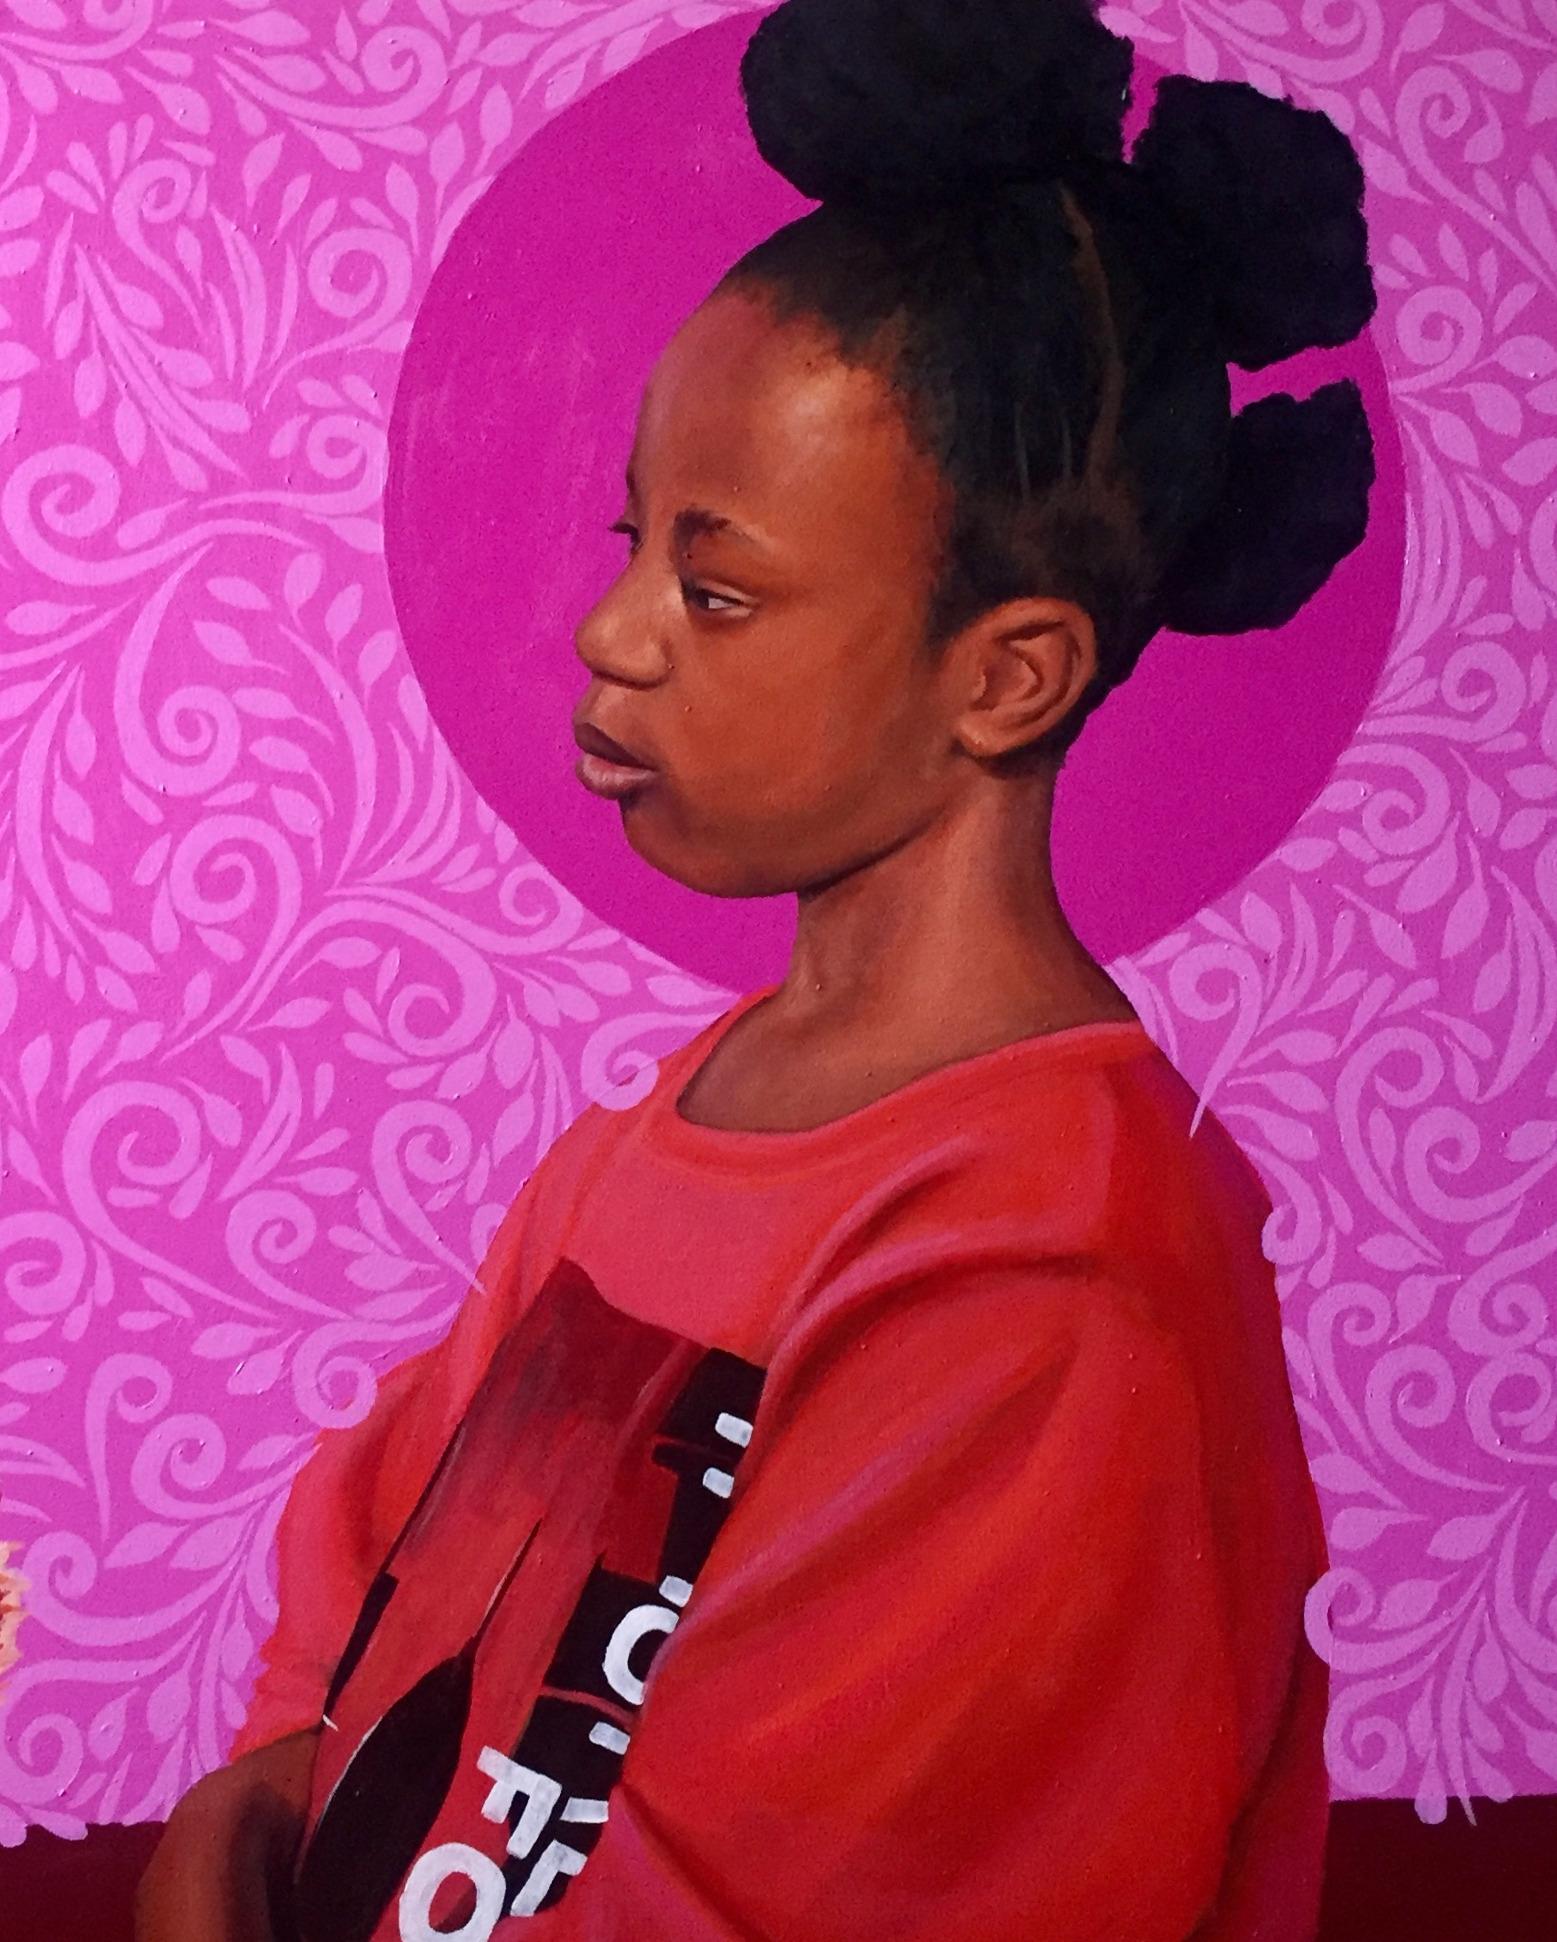 Patience - Painting by Kehinde Mayowa